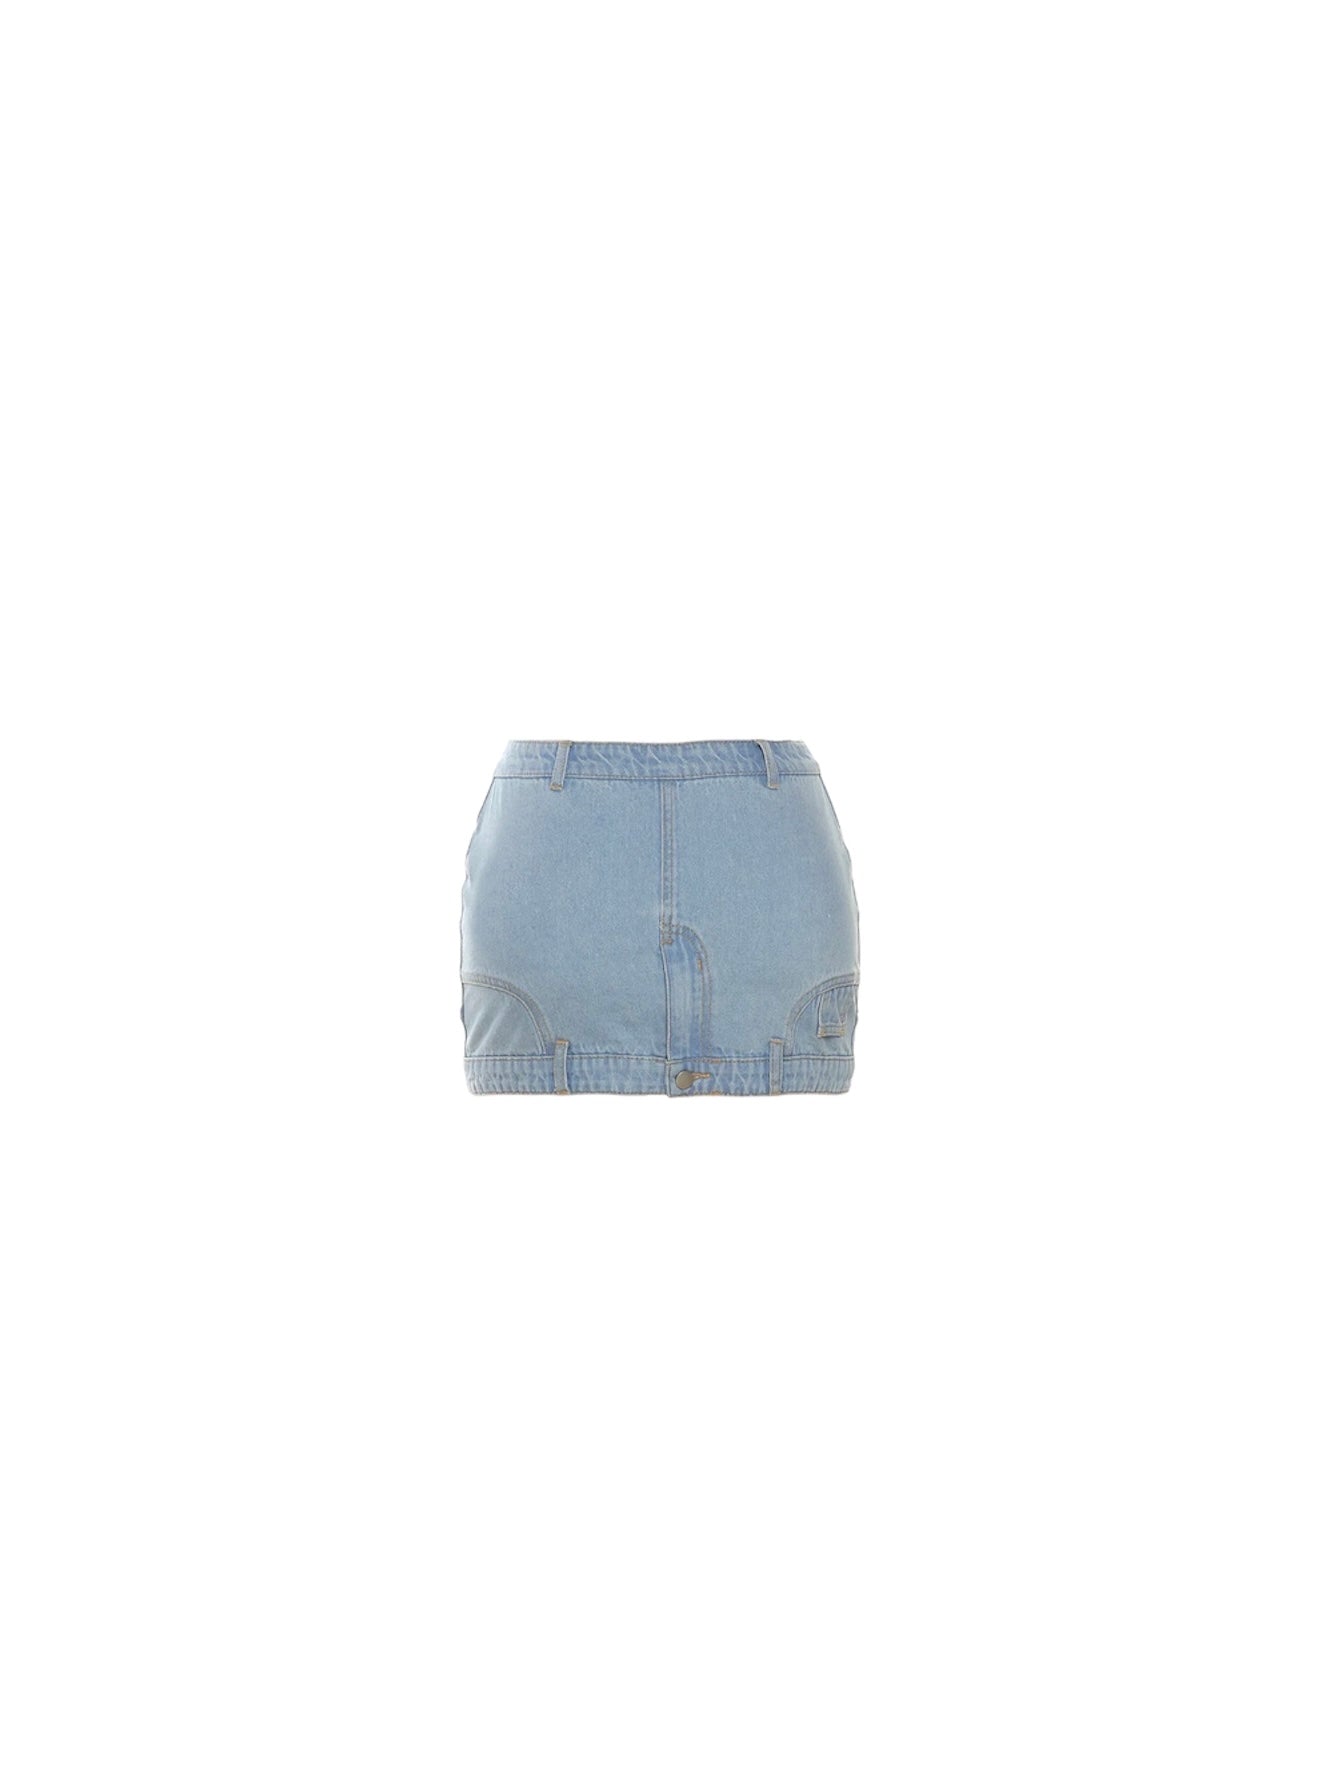 Out Of Pocket Denim Mini Skirt - Dezired Beauty Boutique